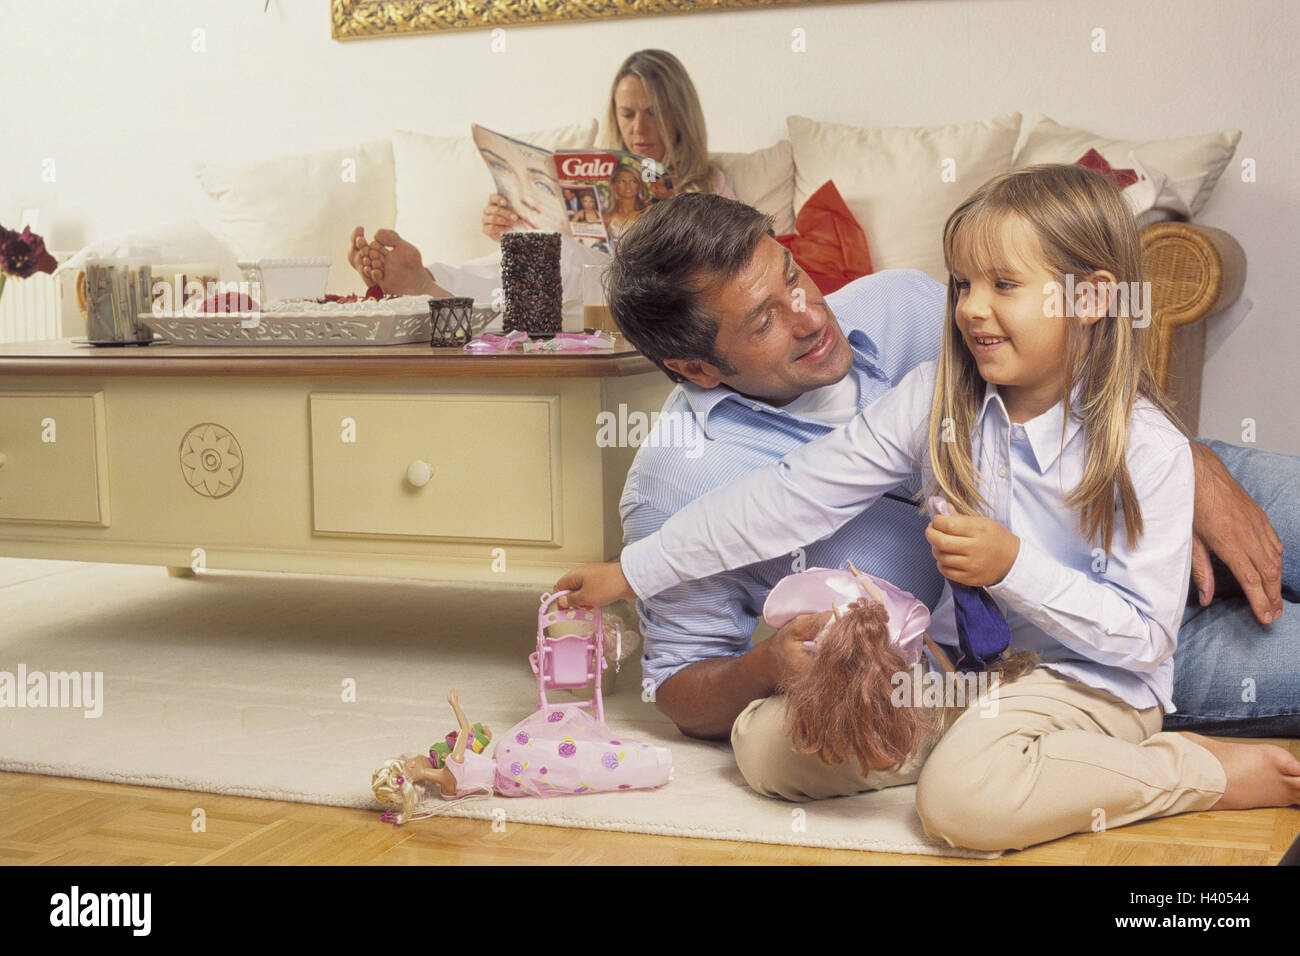 Sitting rooms, father, subsidiary, play, Barbiepuppen, nut, magazine, read,  leisure time, family, man, child, girl, dolls, Barbie, Barbies,  Barbiepuppe, game, together, floor, happy, allowance, care, harmony, woman,  sofa, magazine, magazine, family life